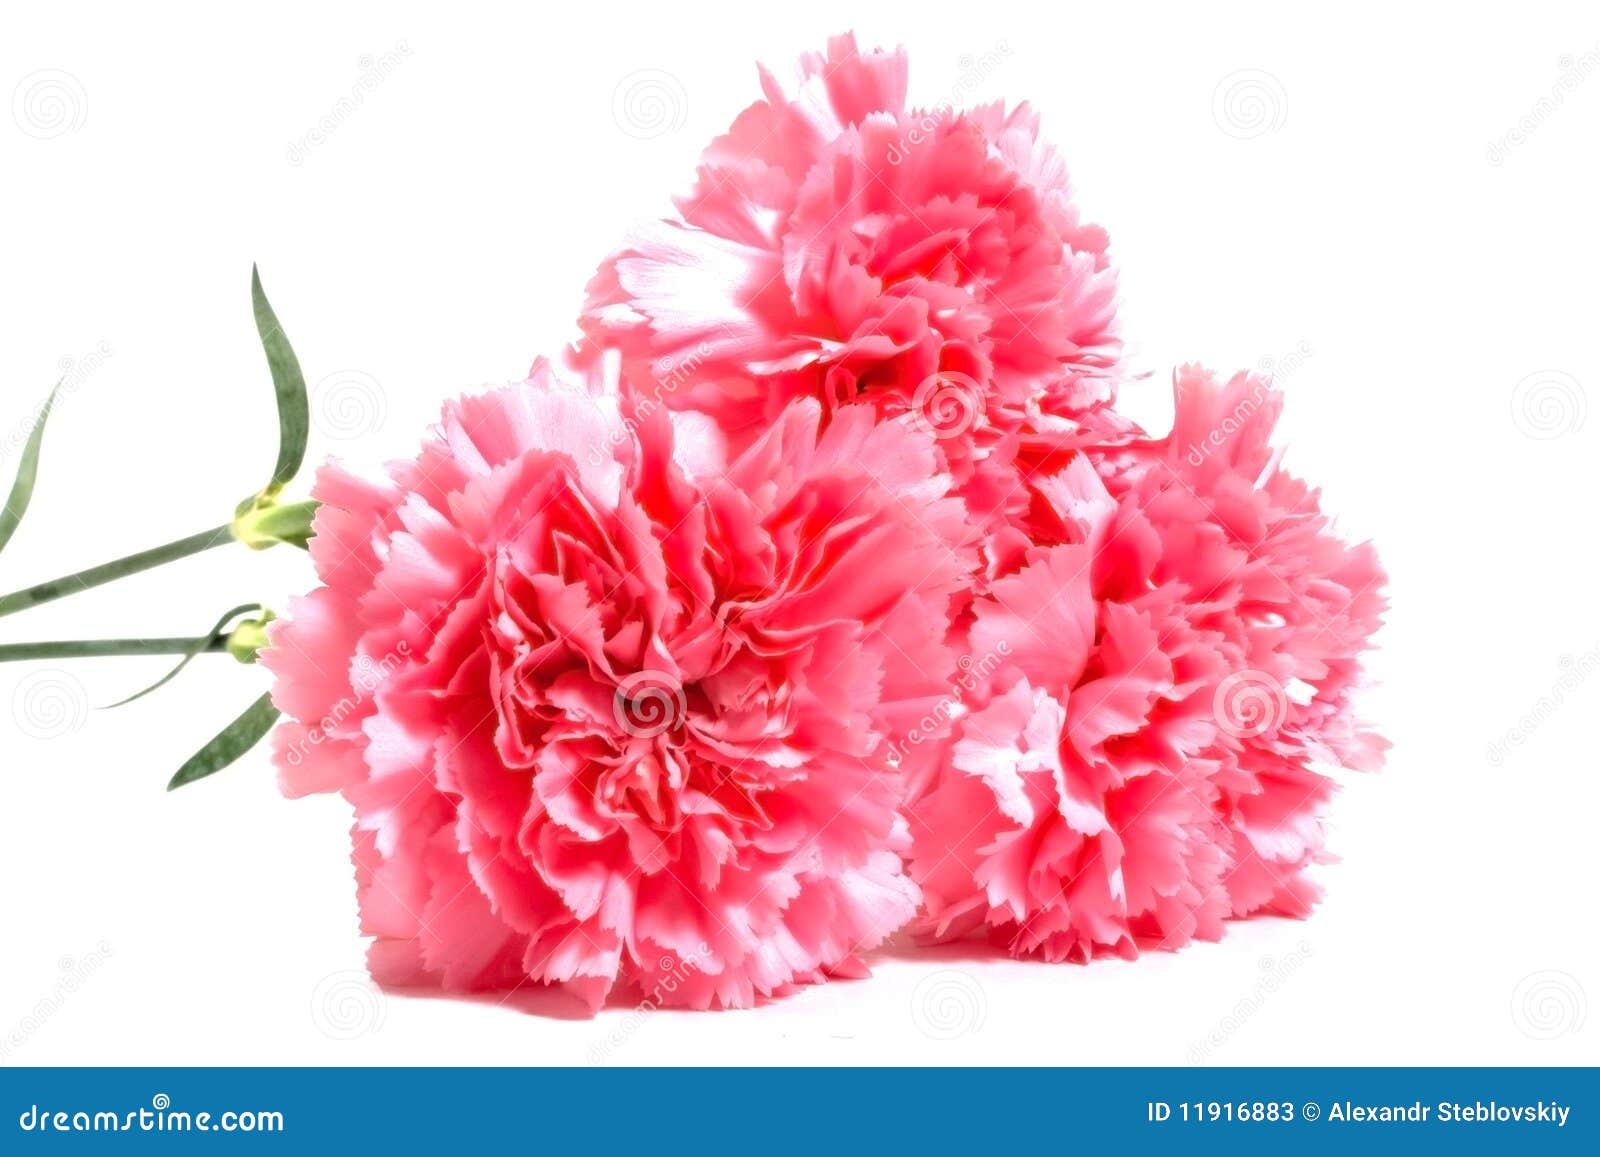 Three pink carnations stock image. Image of love, gift - 11916883